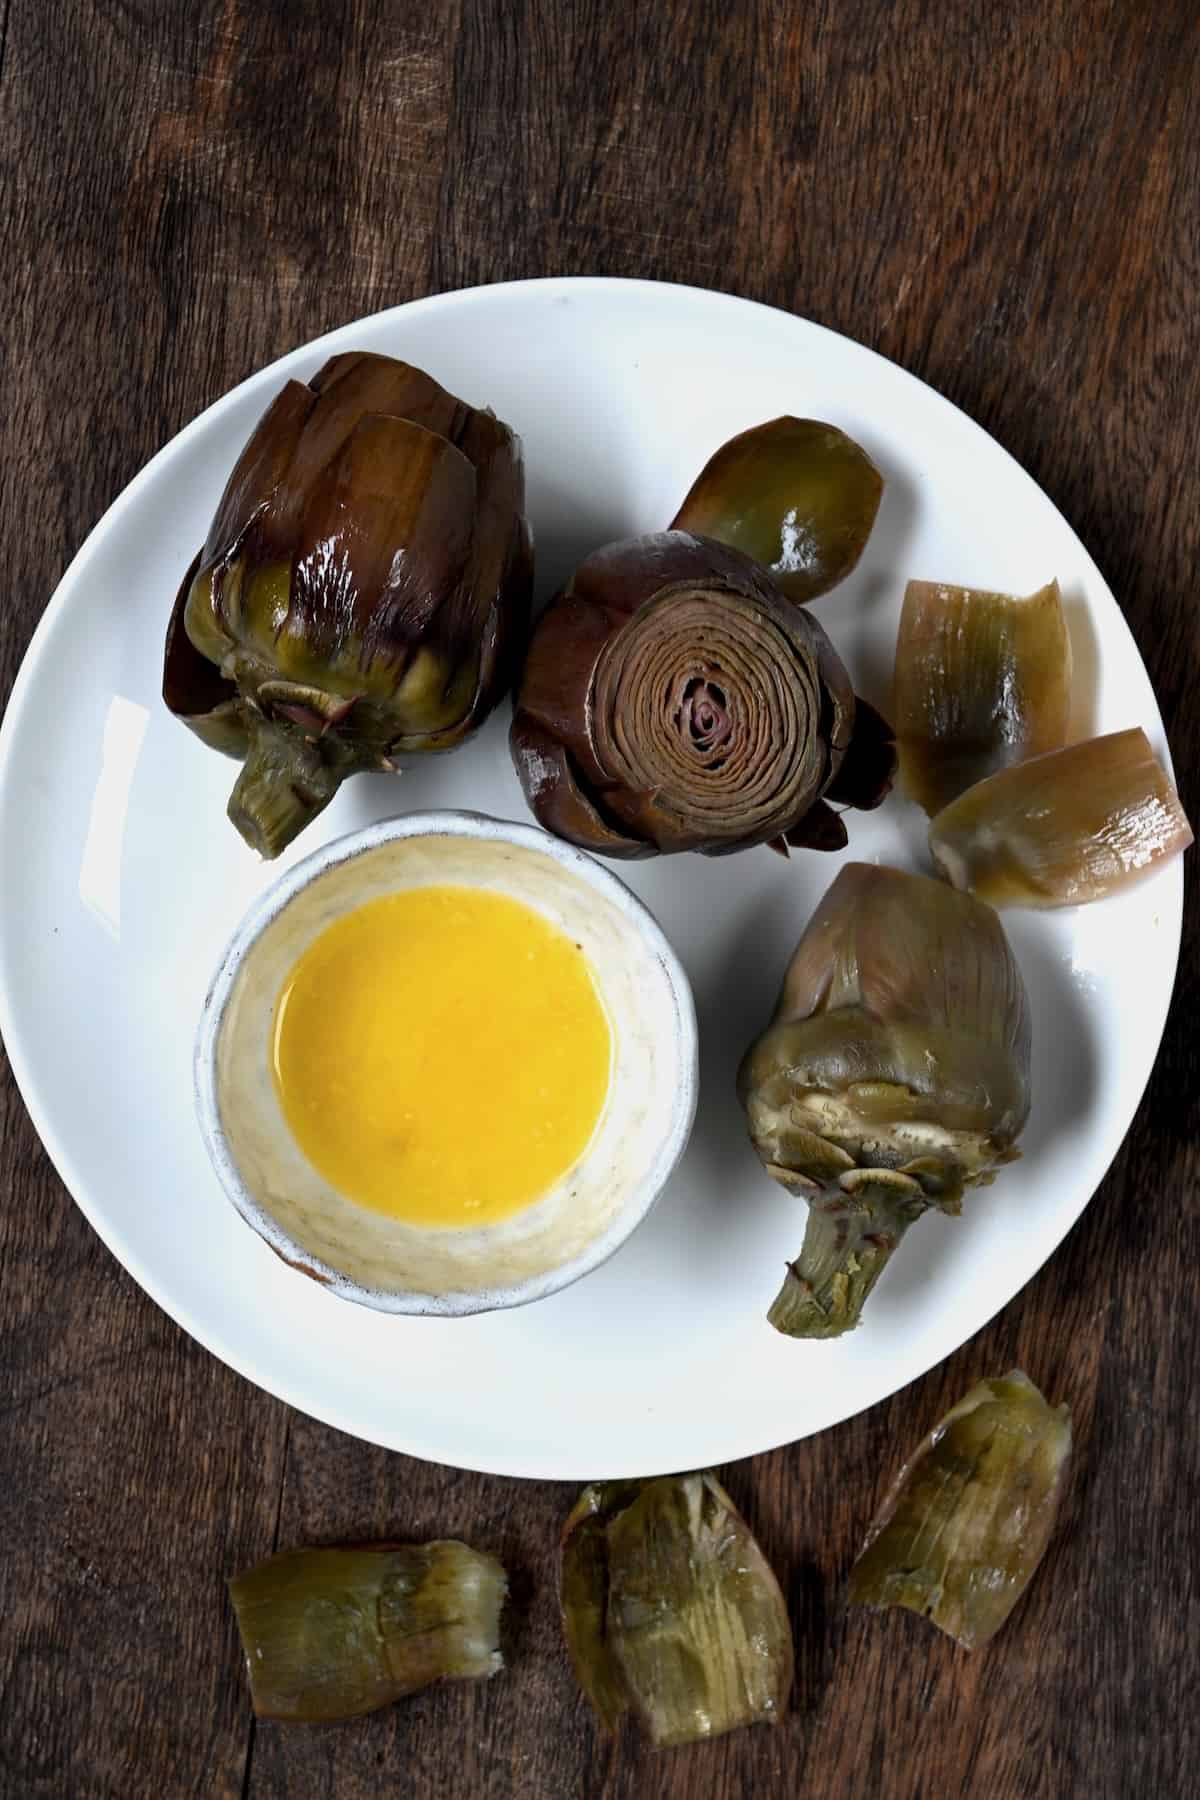 Artichokes served with lemon butter sauce